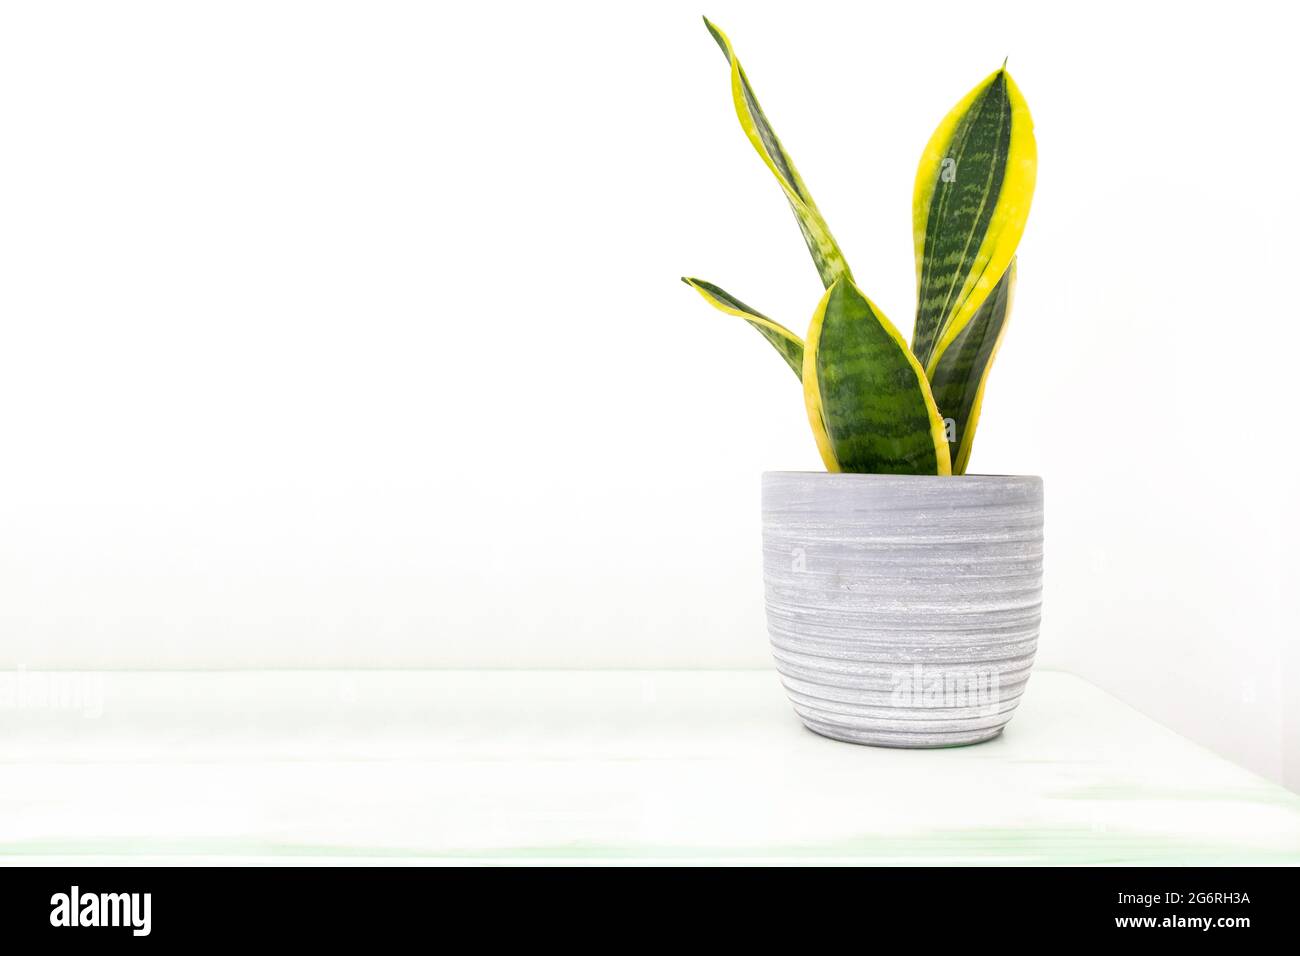 Sansevieria plant in a modern flower pot on a white wooden shelf. White background and empty copy space for Editor's content. Stock Photo